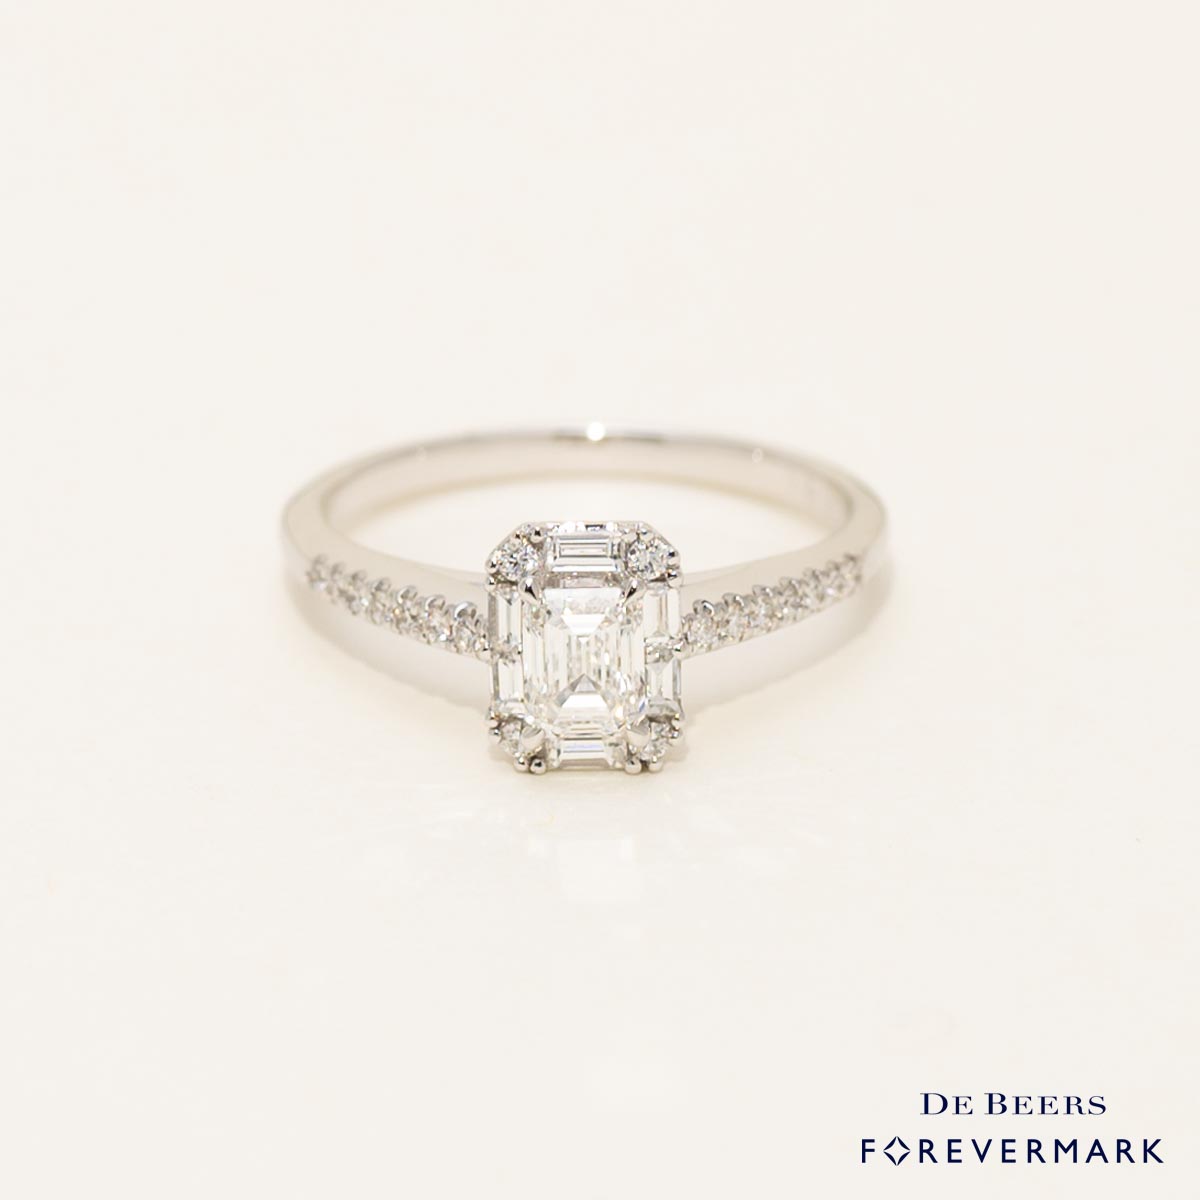 De Beers Forevermark Emerald Cut Diamond Engagement Ring in 14kt White Gold (3/4ct tw)